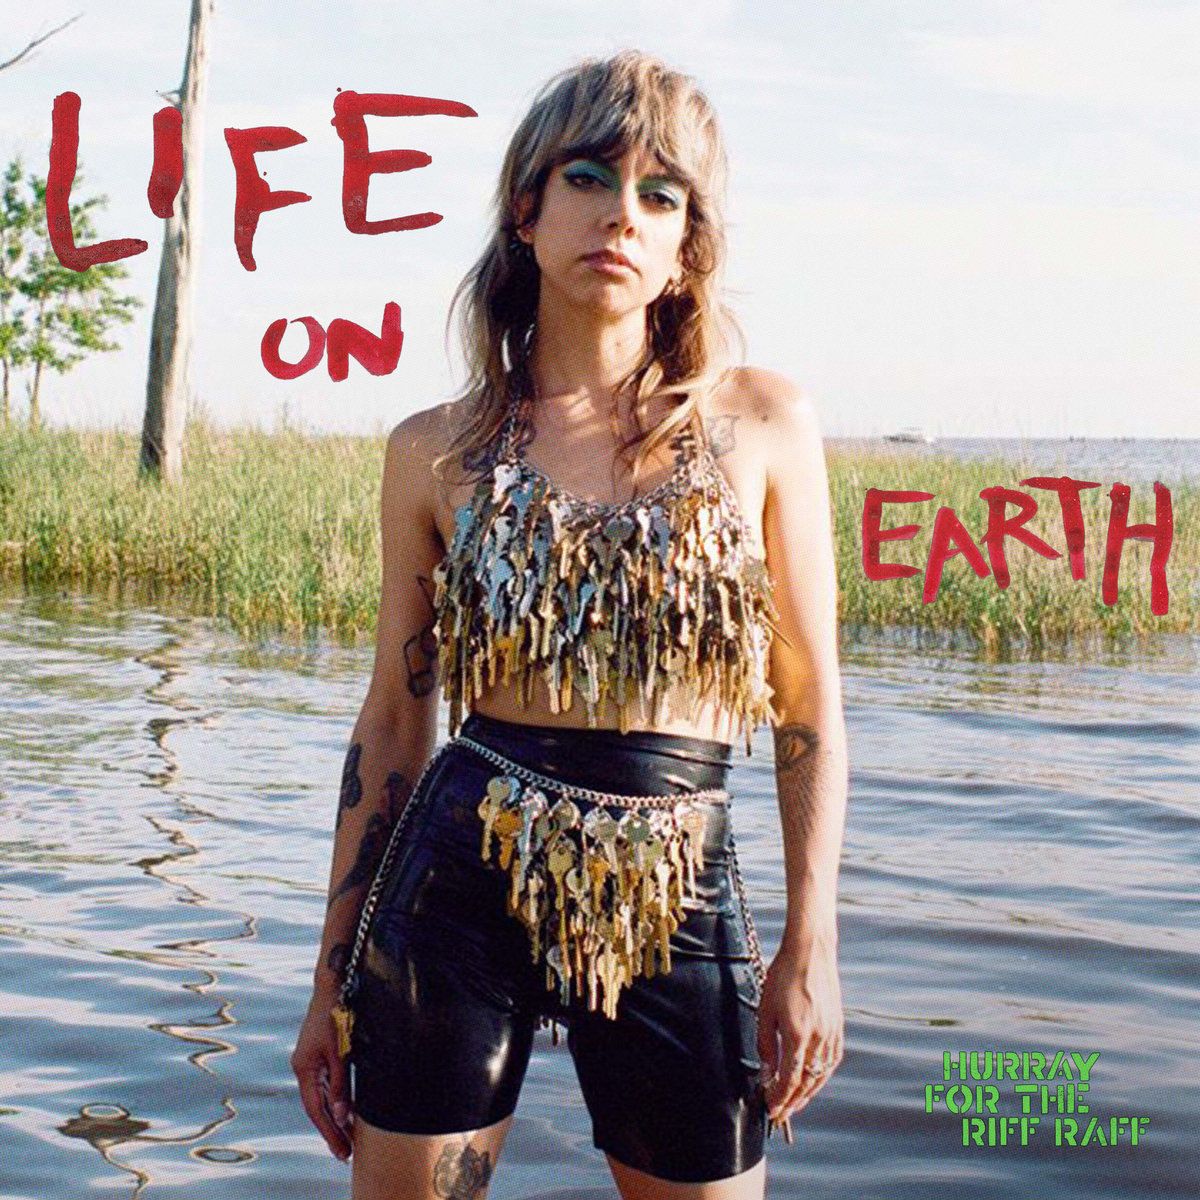 Hurray for the Riff Raff LIFE ON EARTH cover artwork